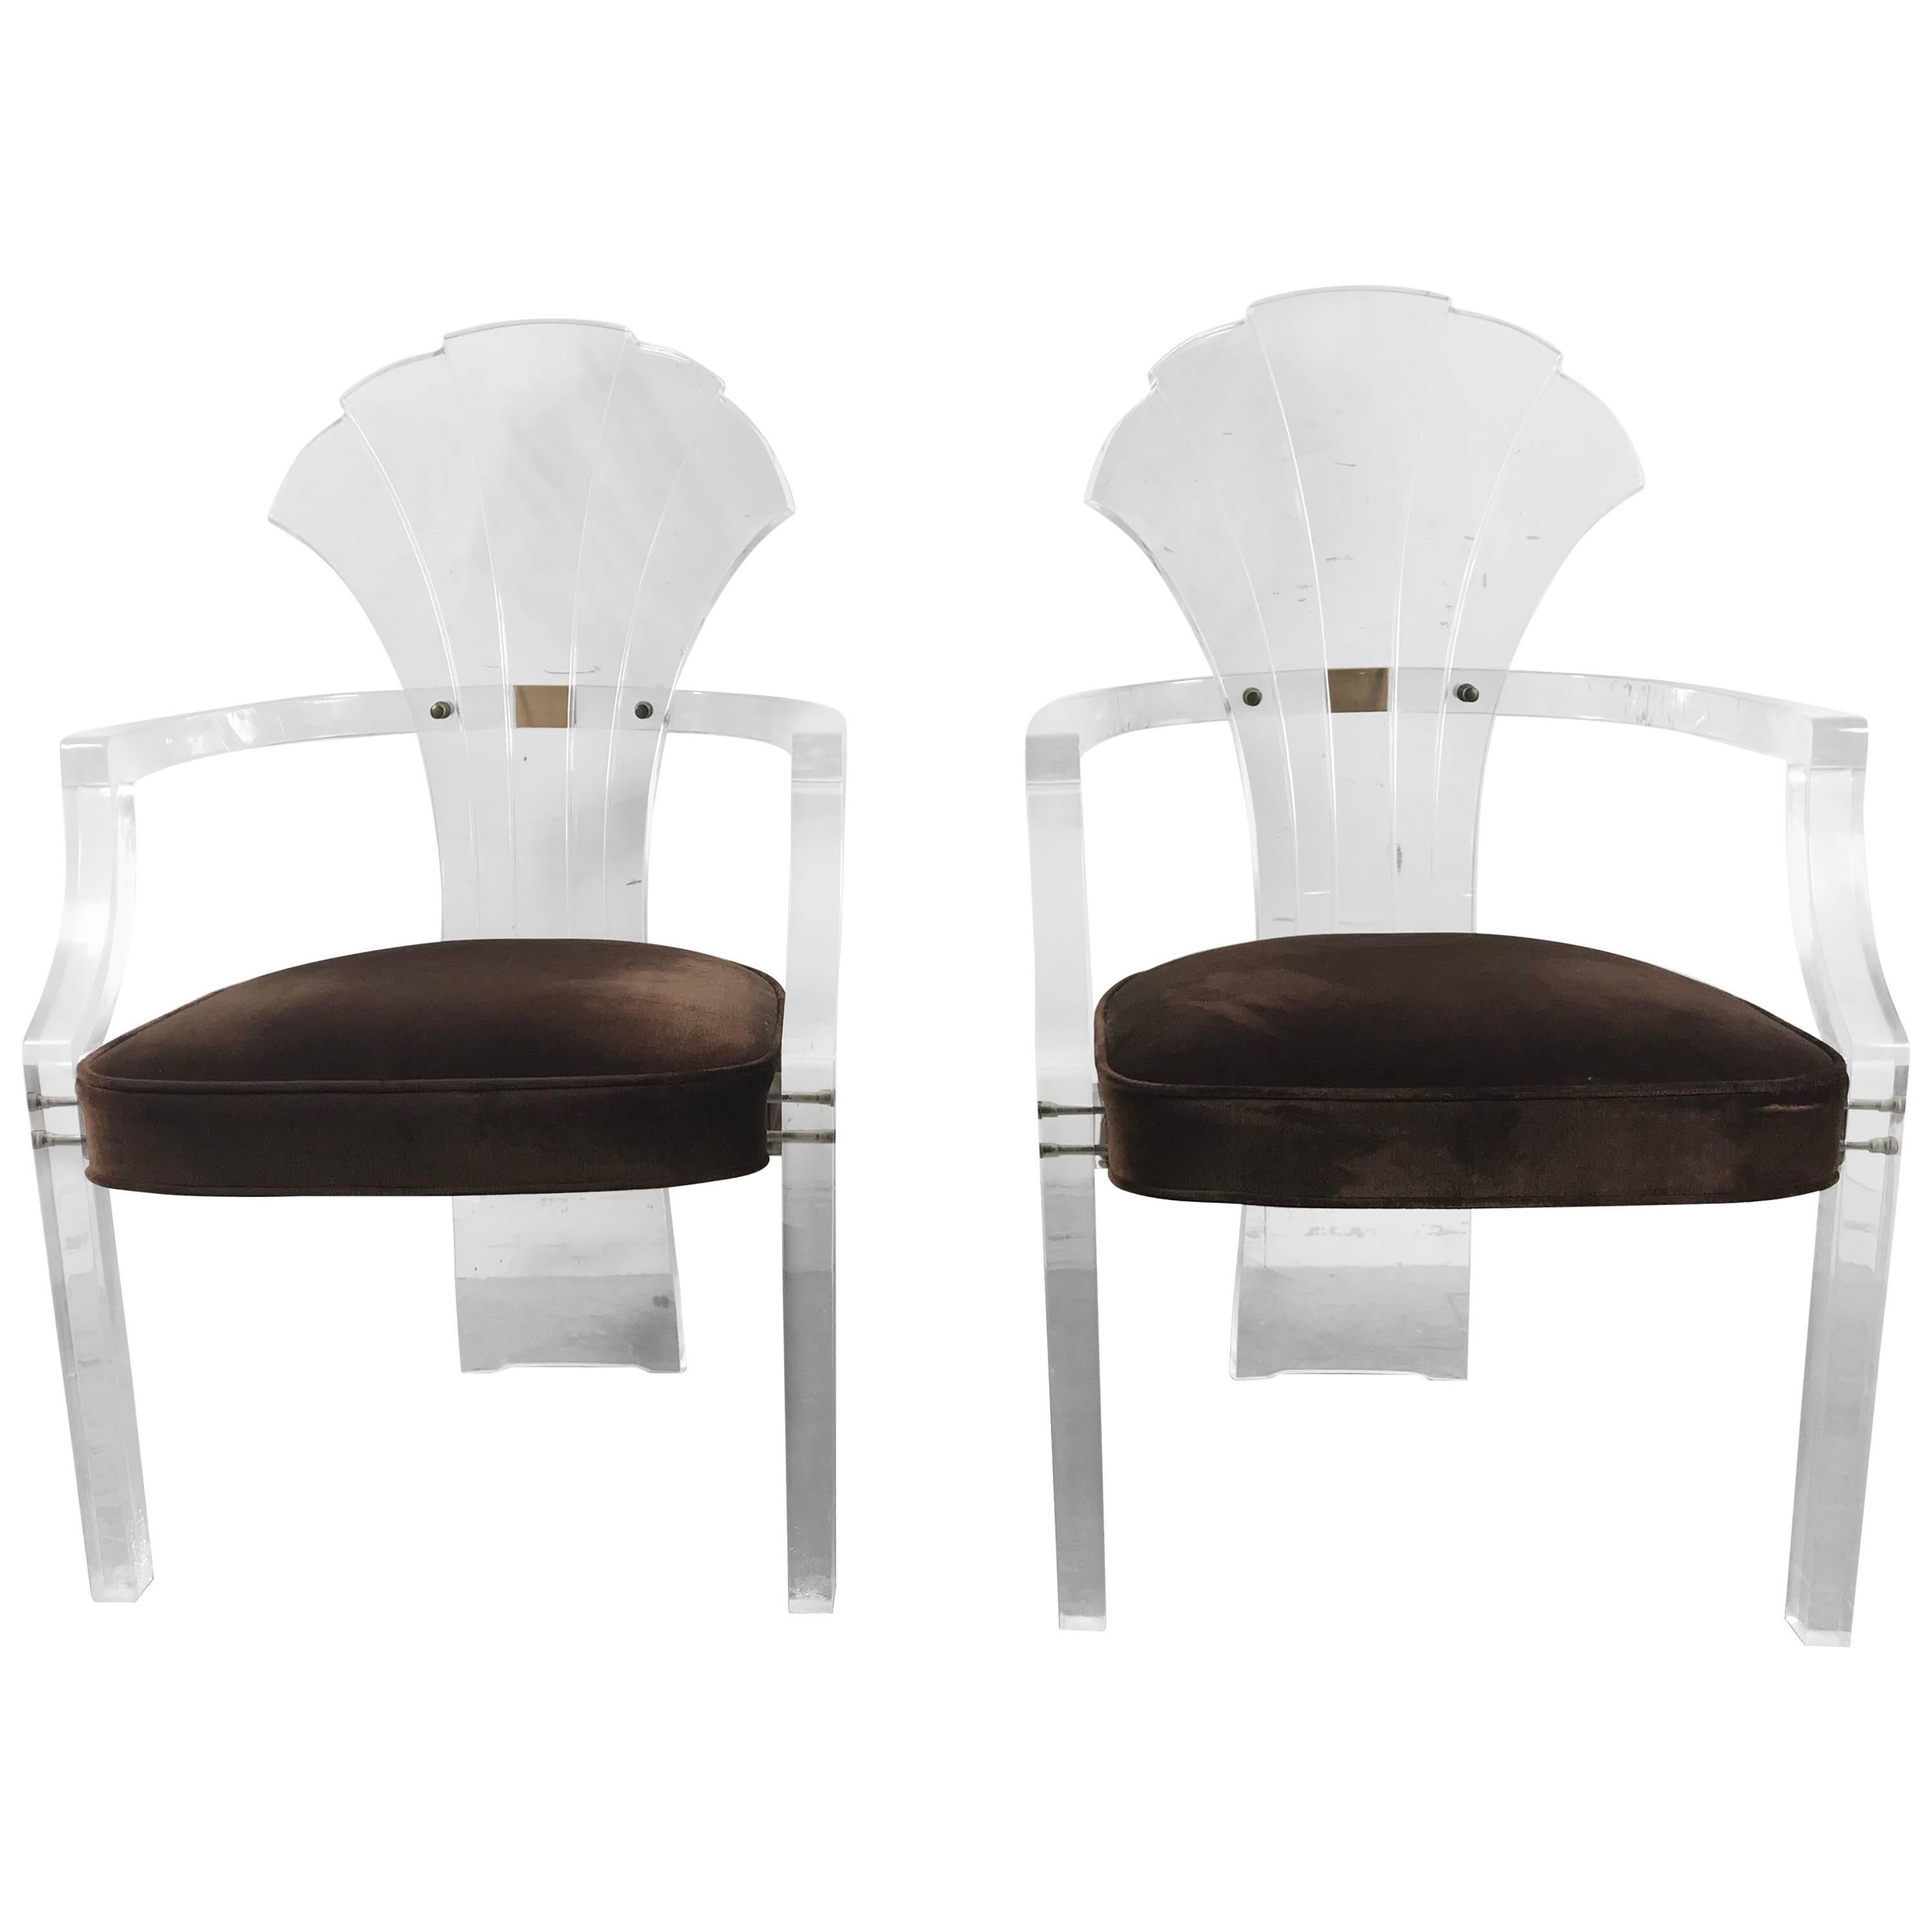 Pair of Lucite Arm Chairs by Hill Manufacturing after Charles Hollis Jones